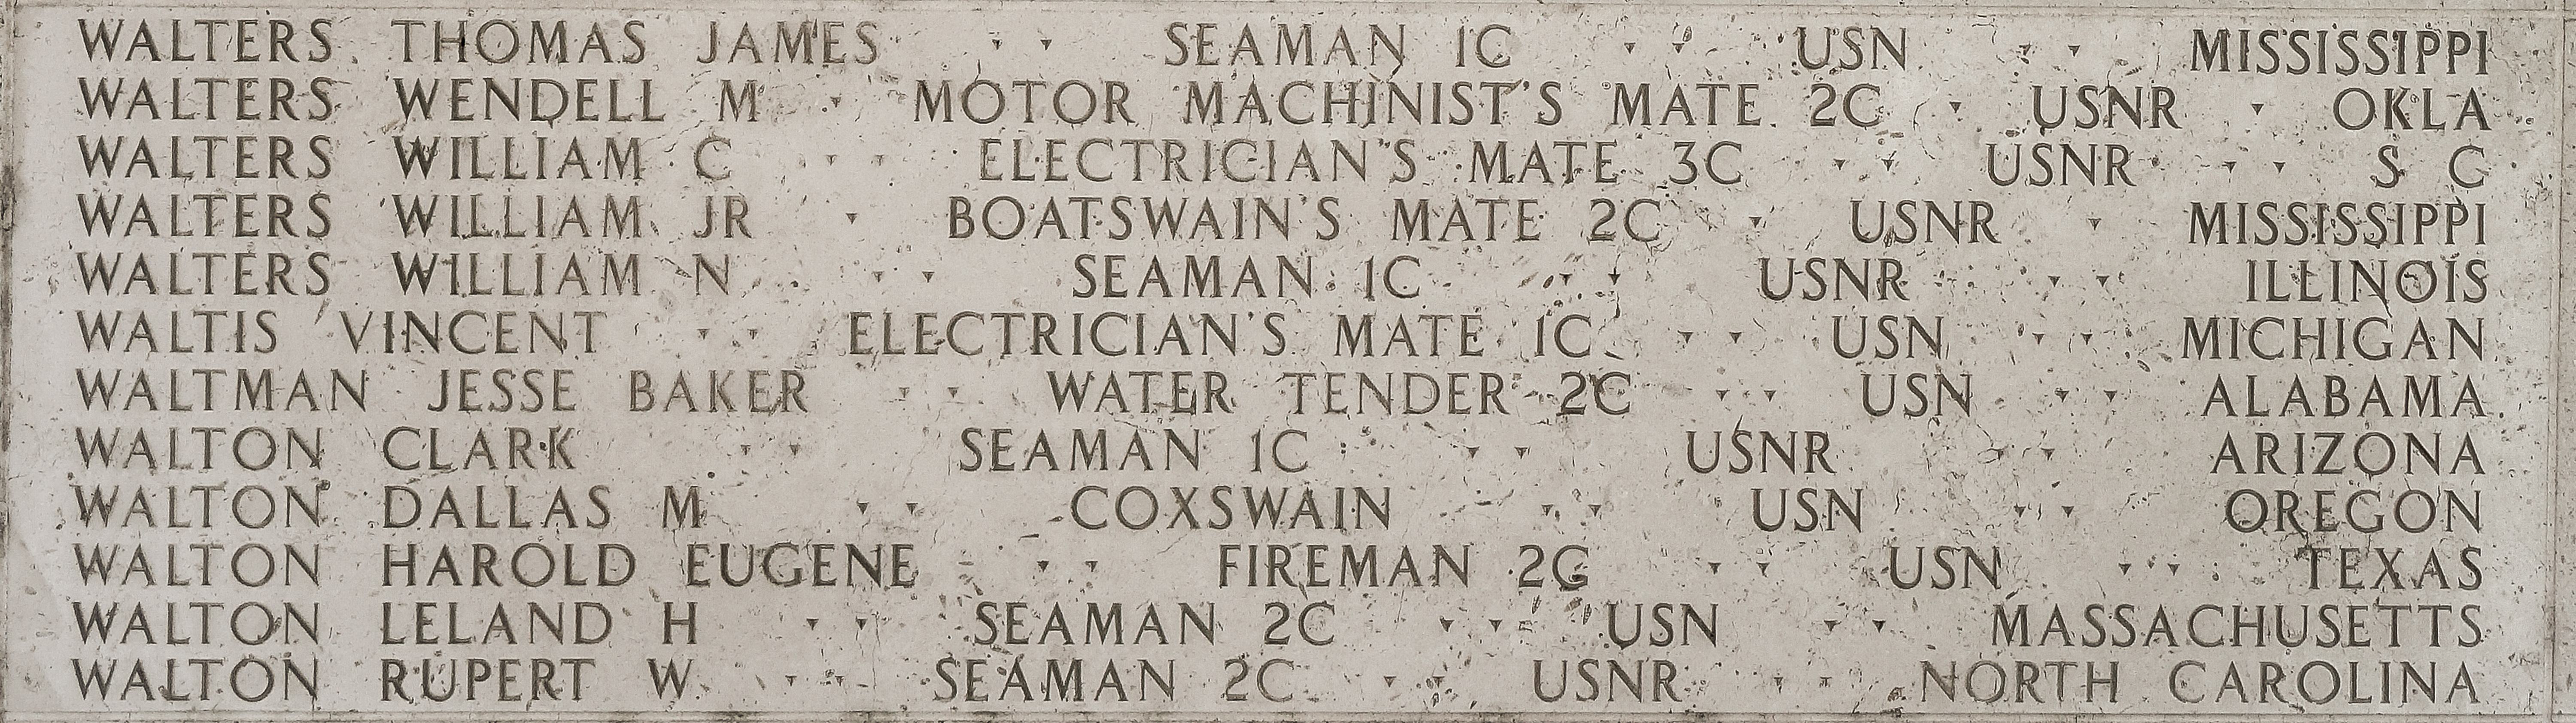 William  Walters, Boatswain's Mate Second Class